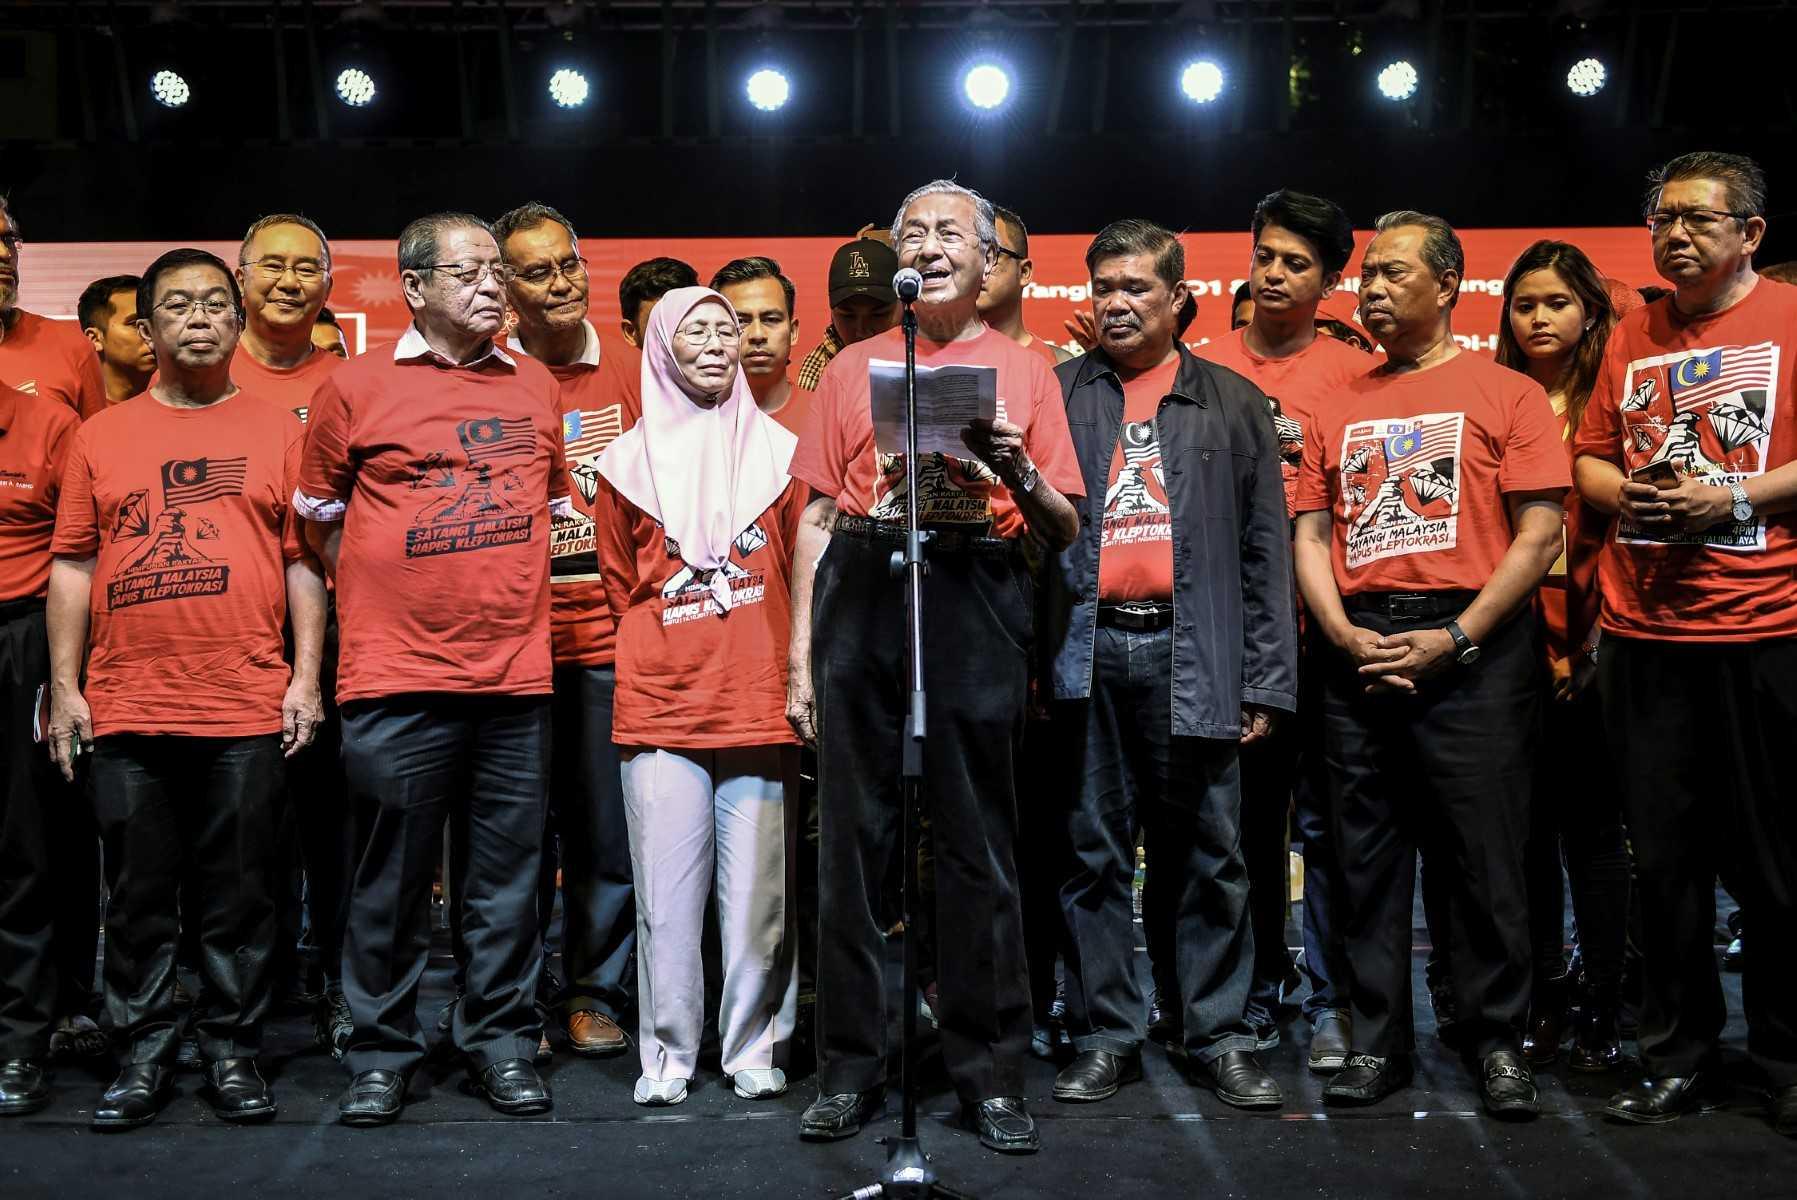 Former prime minister Dr Mahathir Mohamad (centre) speaks at a Pakatan Harapan rally with other coalition leaders including Lim Kit Siang (second left) in Petaling Jaya on Oct 14, 2017. Photo: AFP
